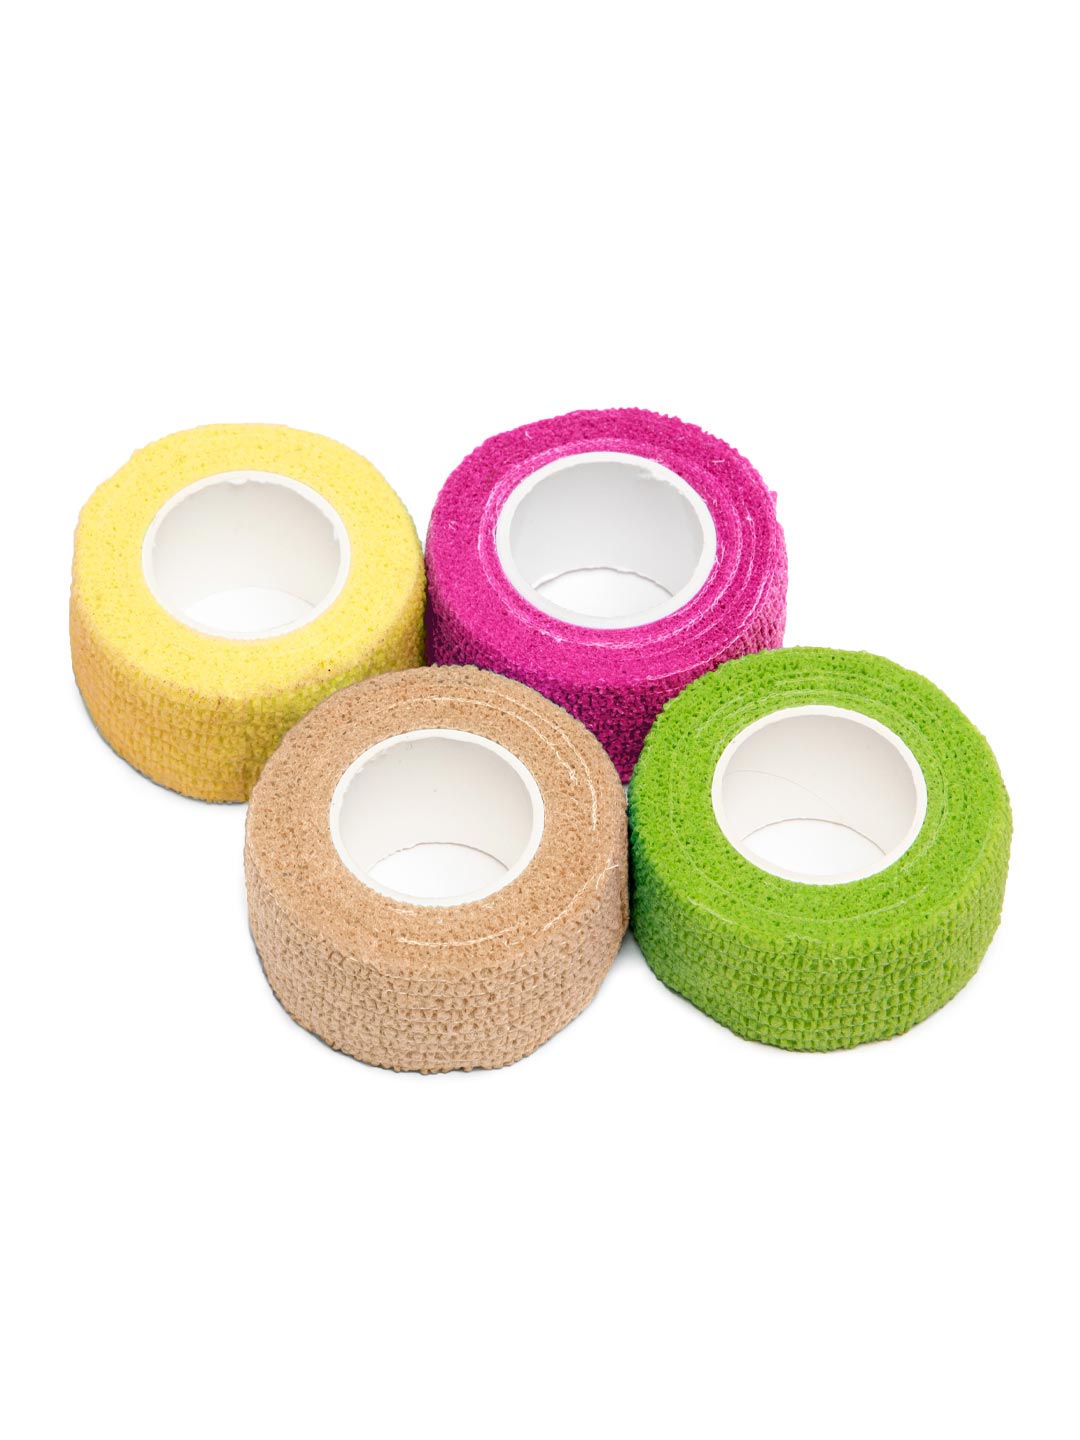 Four rolls of athletic tape, yellow, bright pink, nude and lime green.